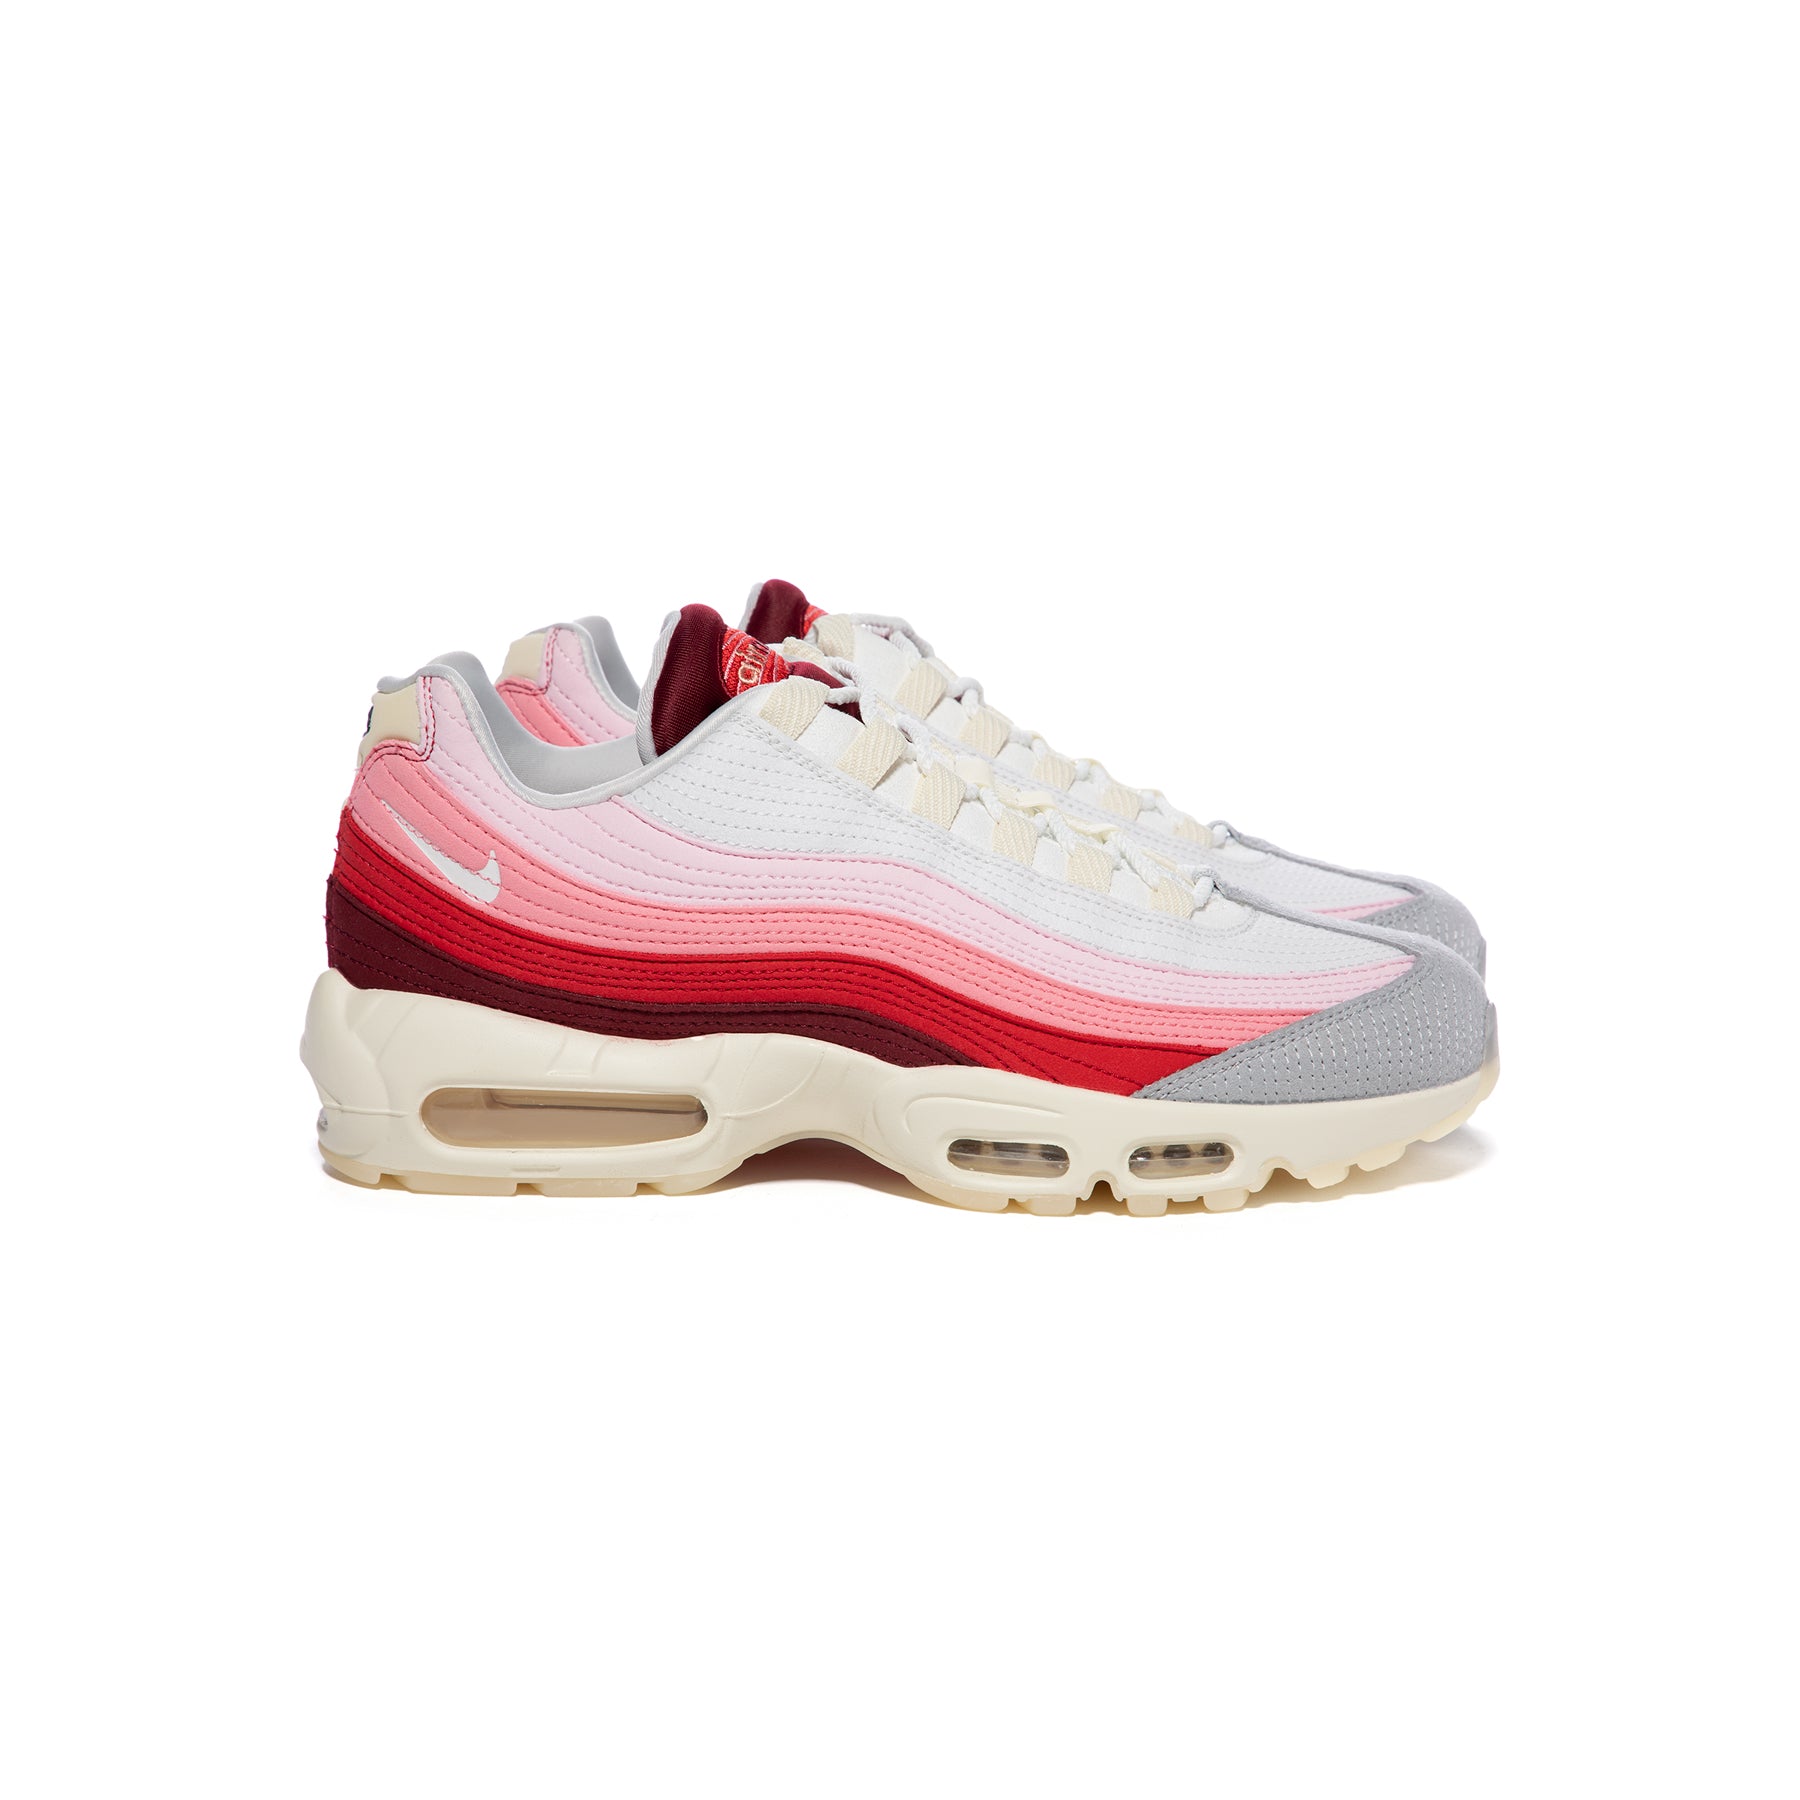 Nike Air Max 95 (Team Red/Summit White/University Red) – Concepts